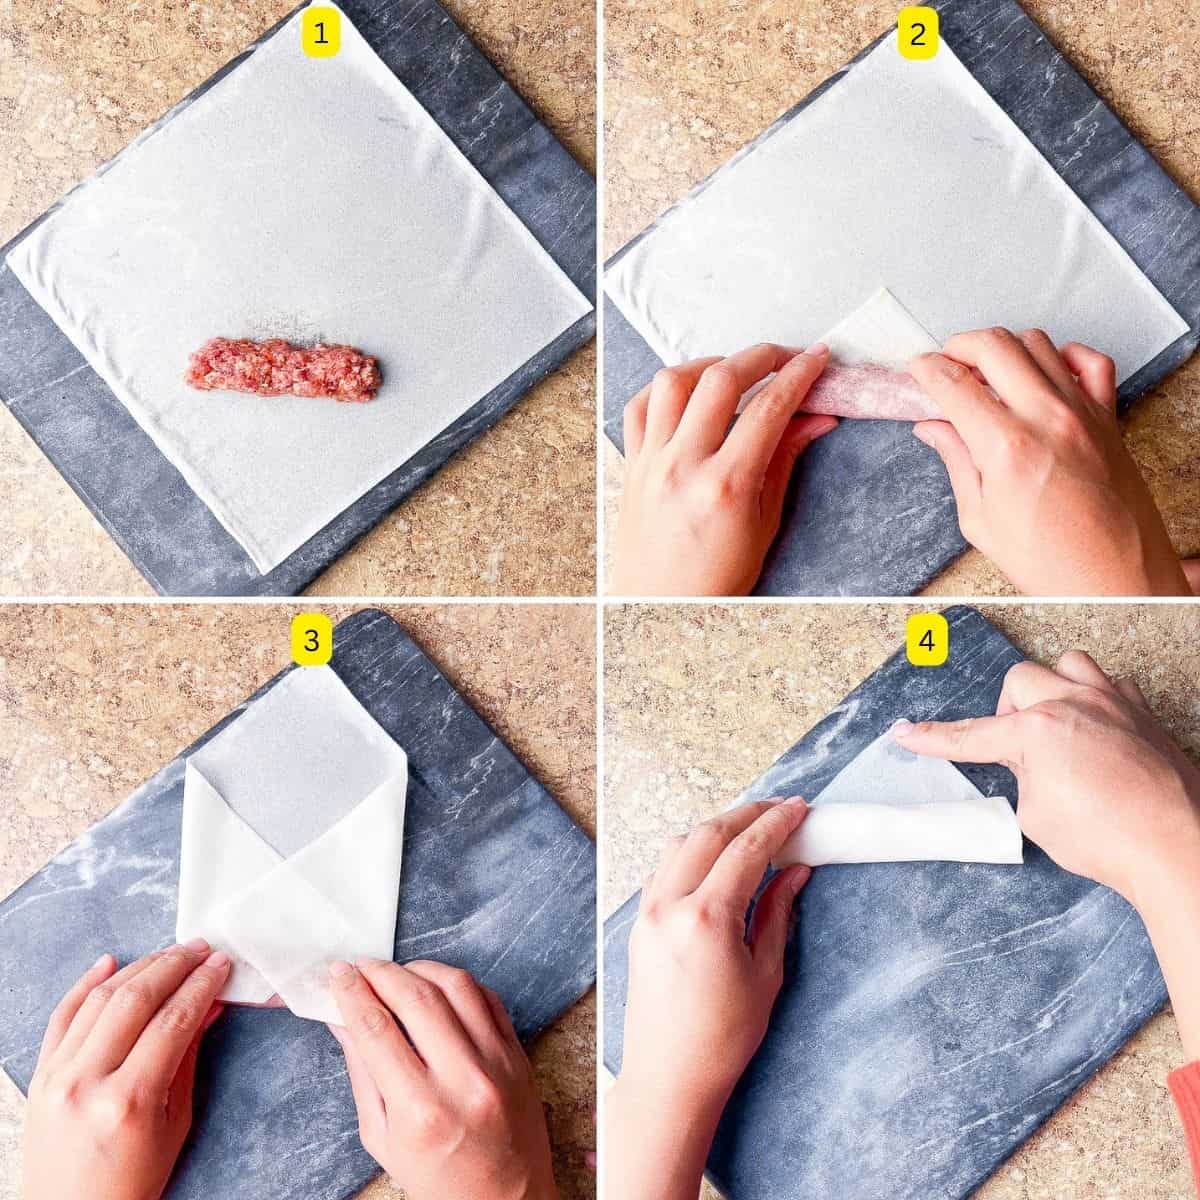 Step by step instructions on how to fold lumpia.